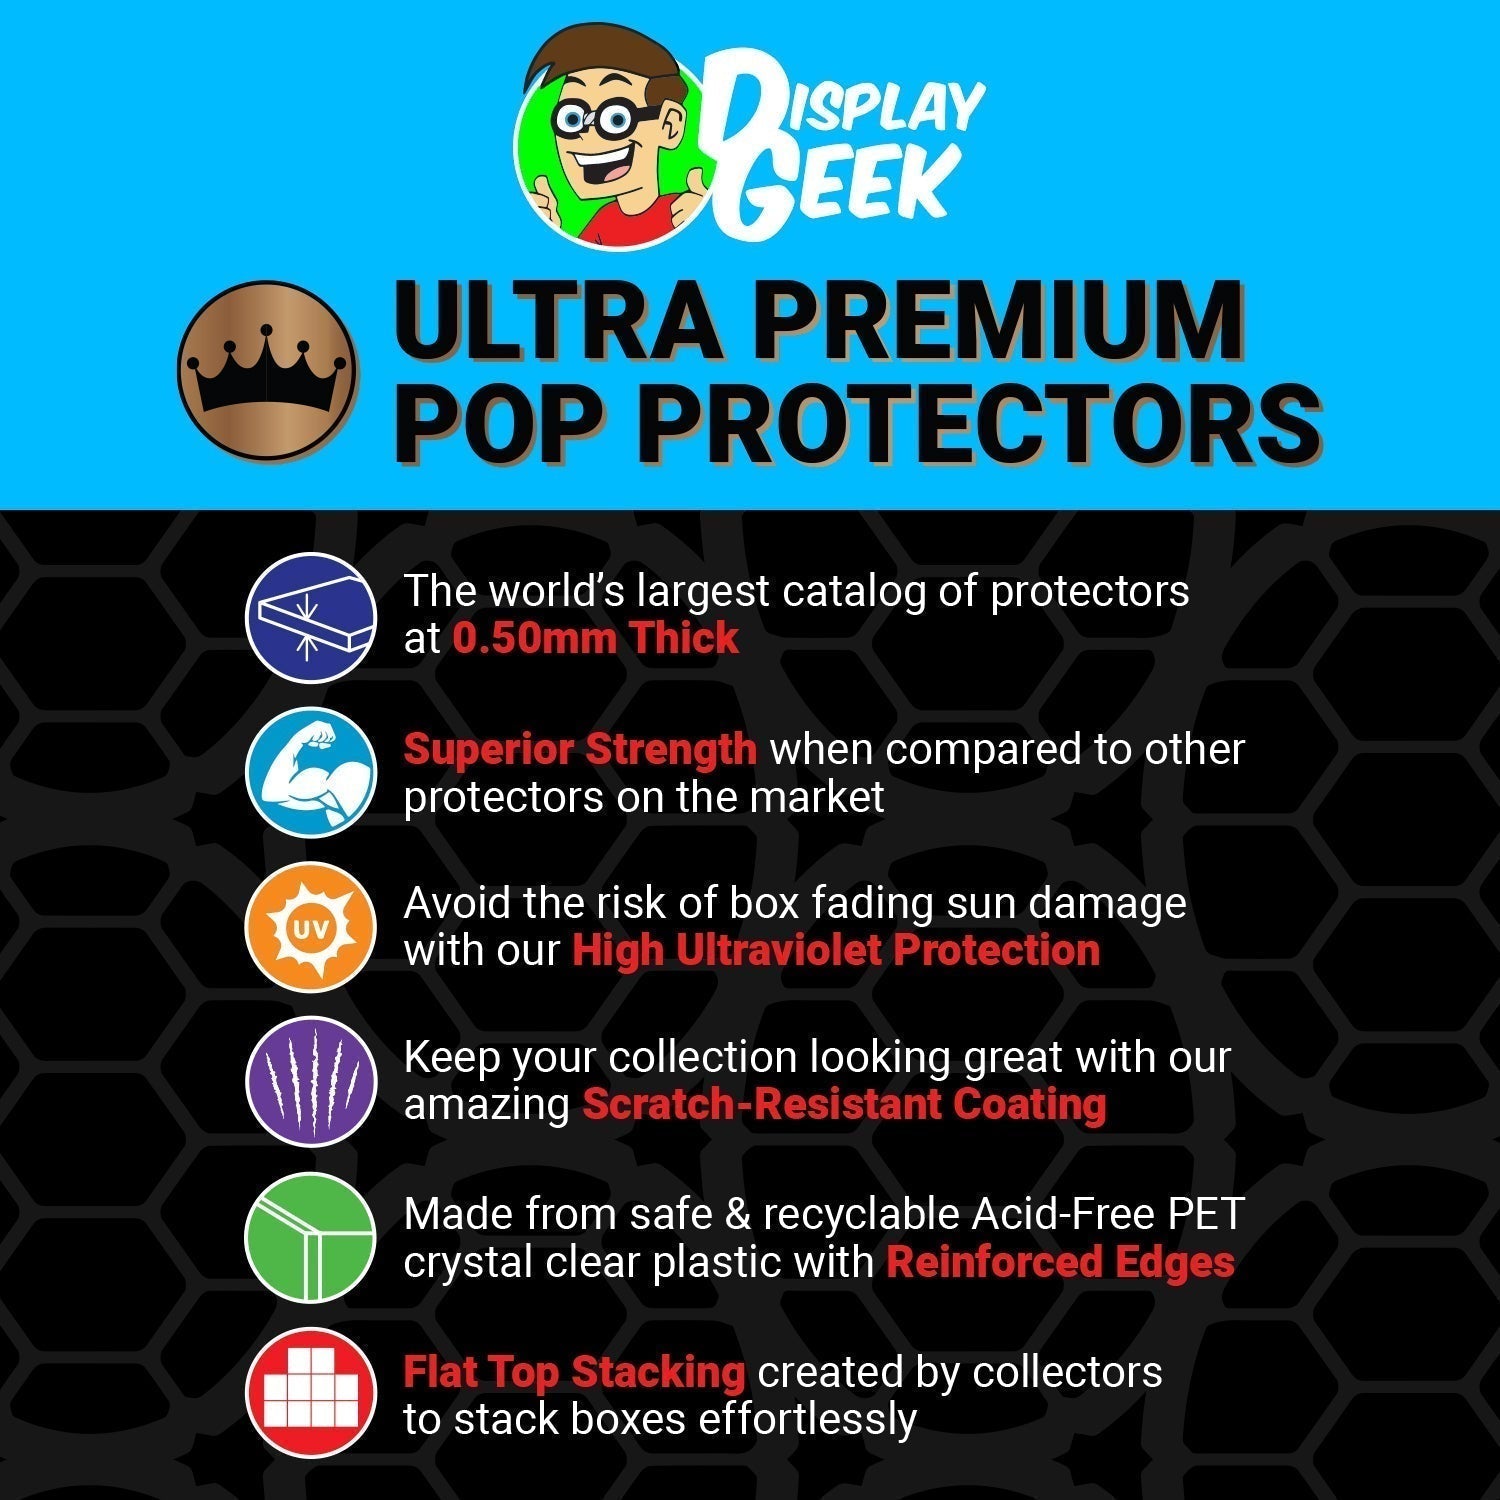 Pop Protector for Luka Doncic Dallas Mavericks #16 Funko Trading Cards - PPG Pop Protector Guide Search Created by Display Geek